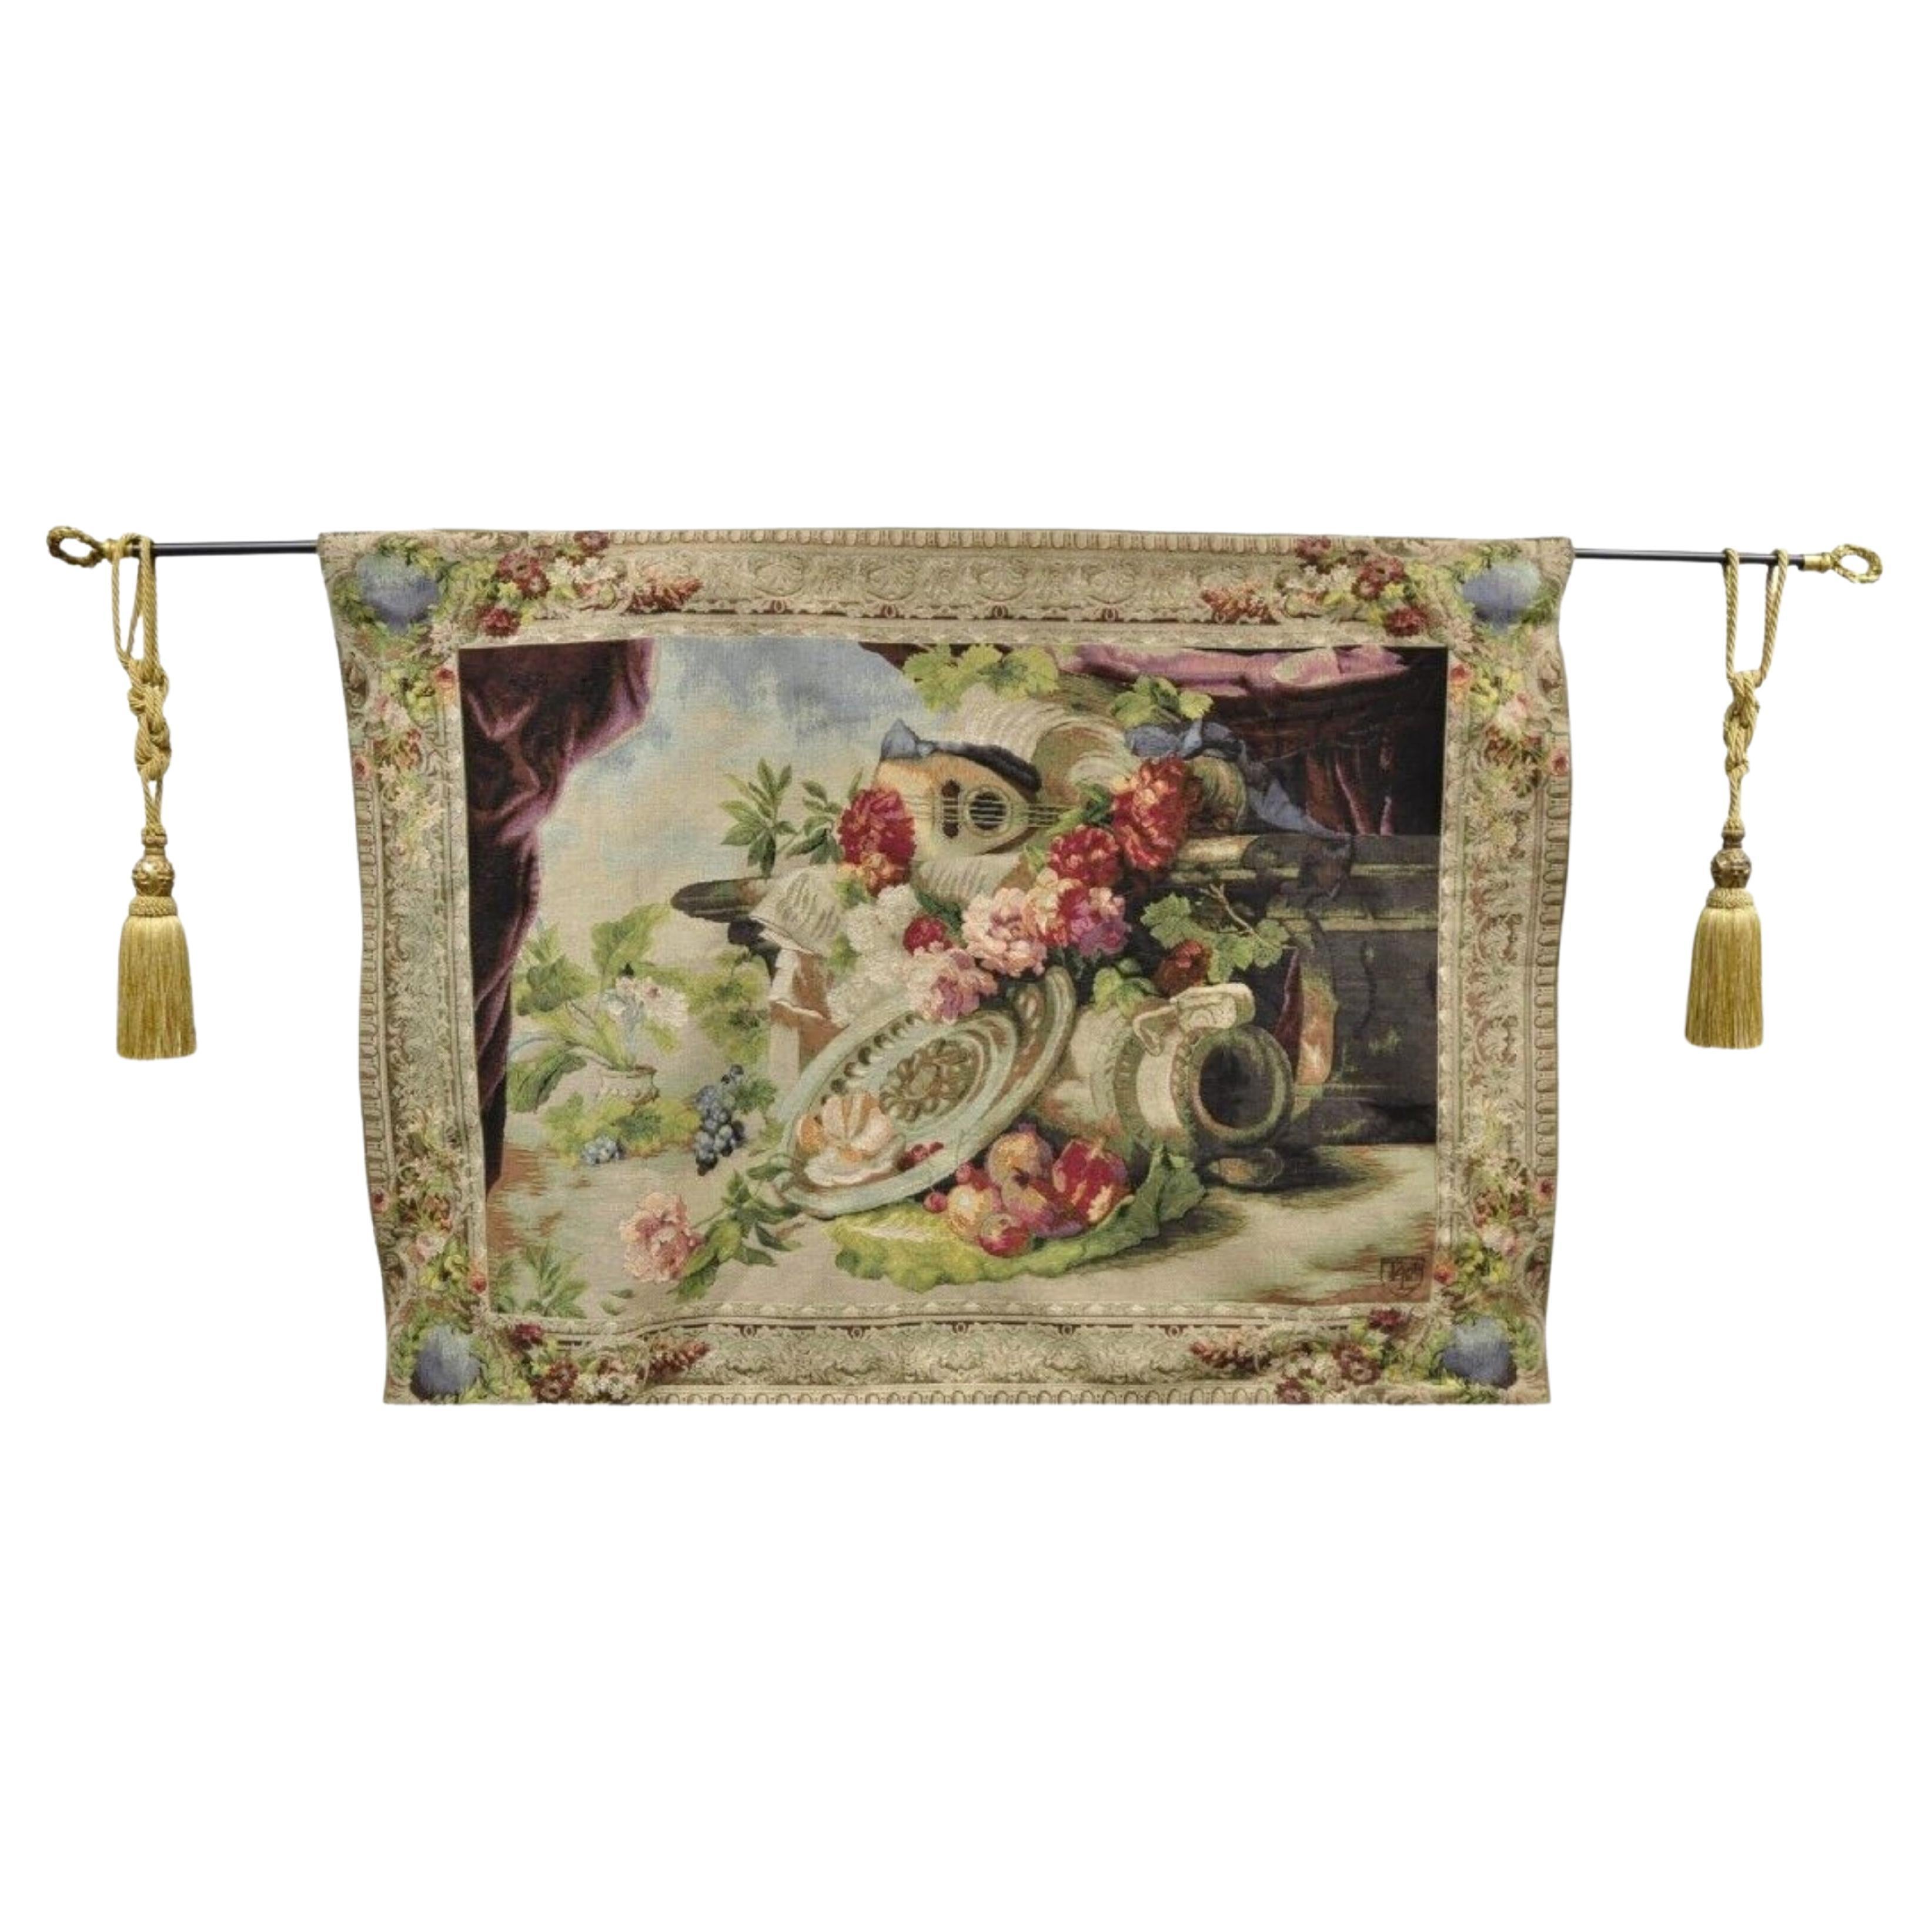 Jacquard Woven French Wall Tapestry Still Life Flowers & Mandolin by J&D For Sale